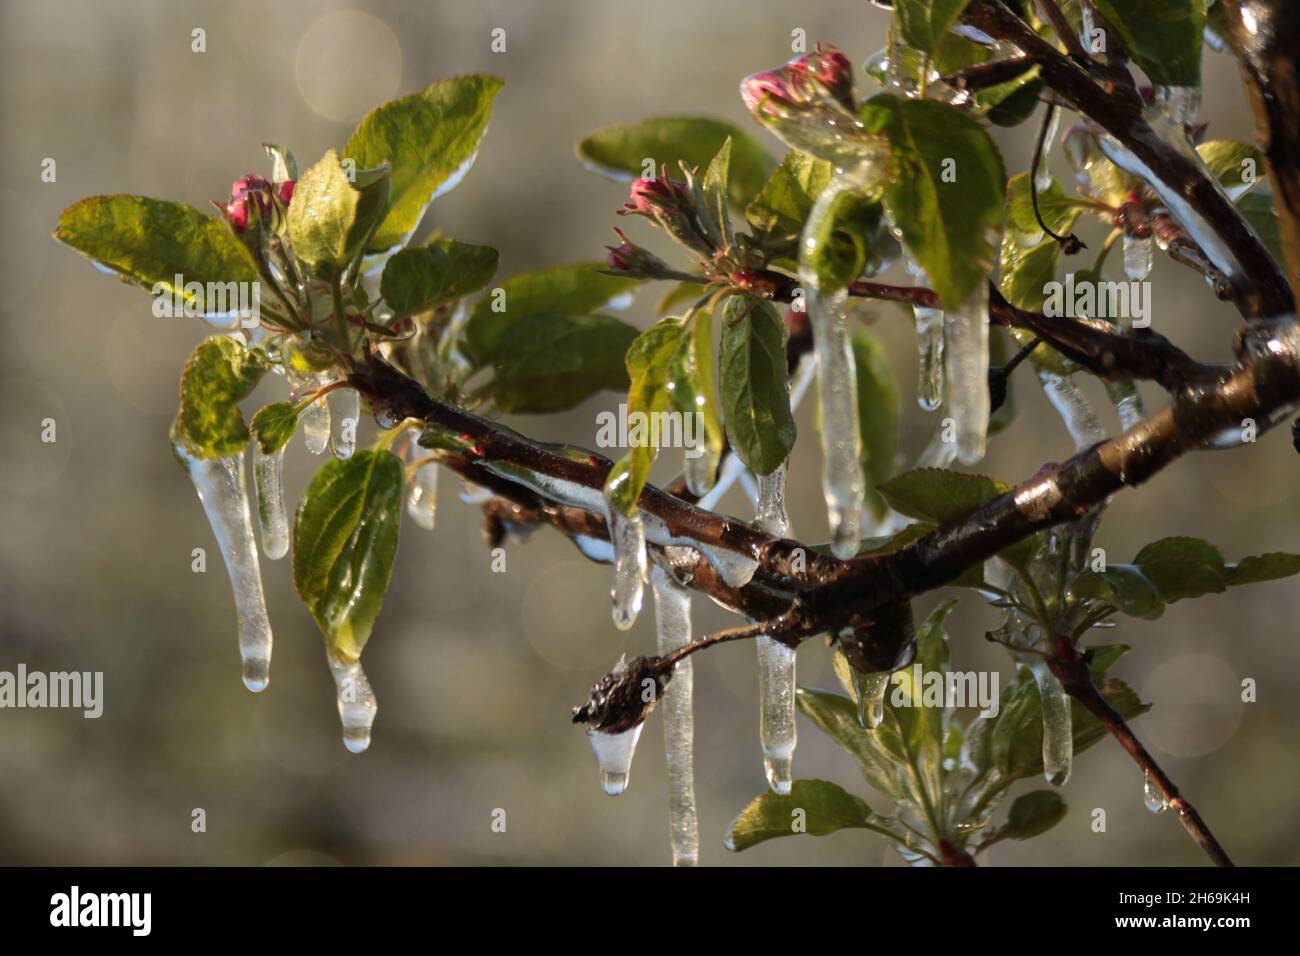 With an ice layer prevent the fruit blossom from freezing. Clotting heat. Stock Photo